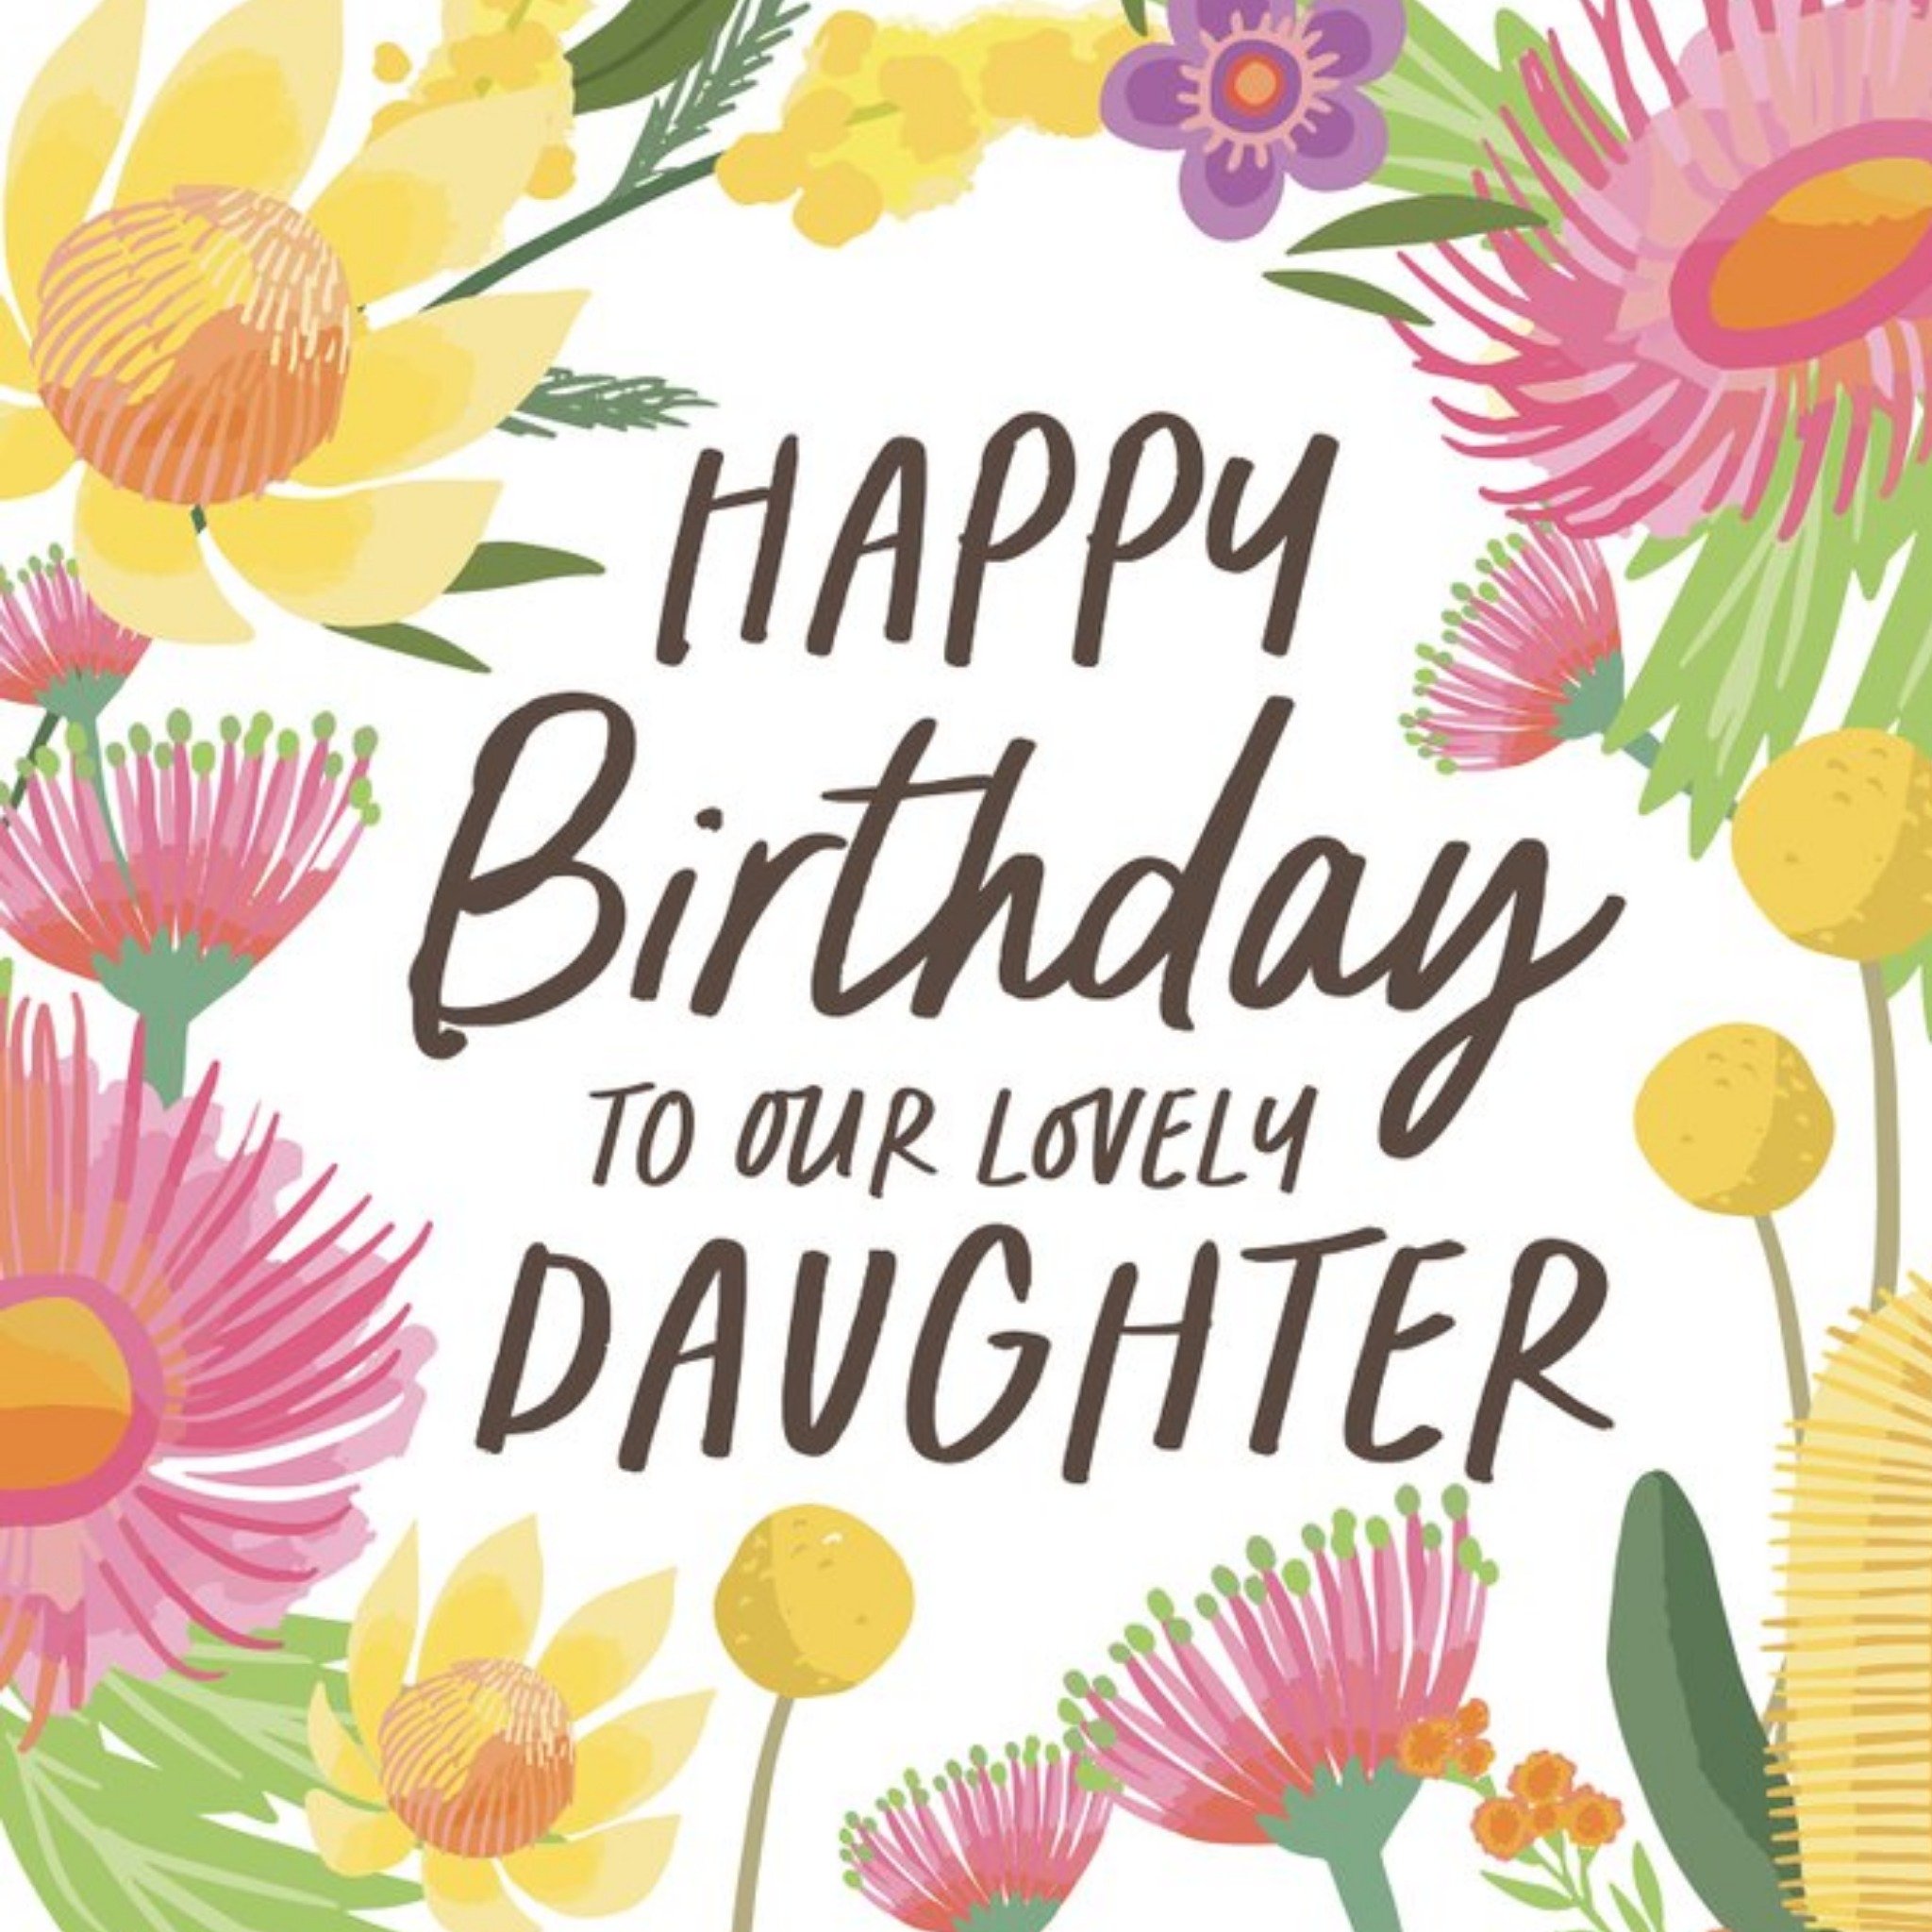 Moonpig Christie Williams Typographic Illustrated Floral Daughter Birthday Card, Large